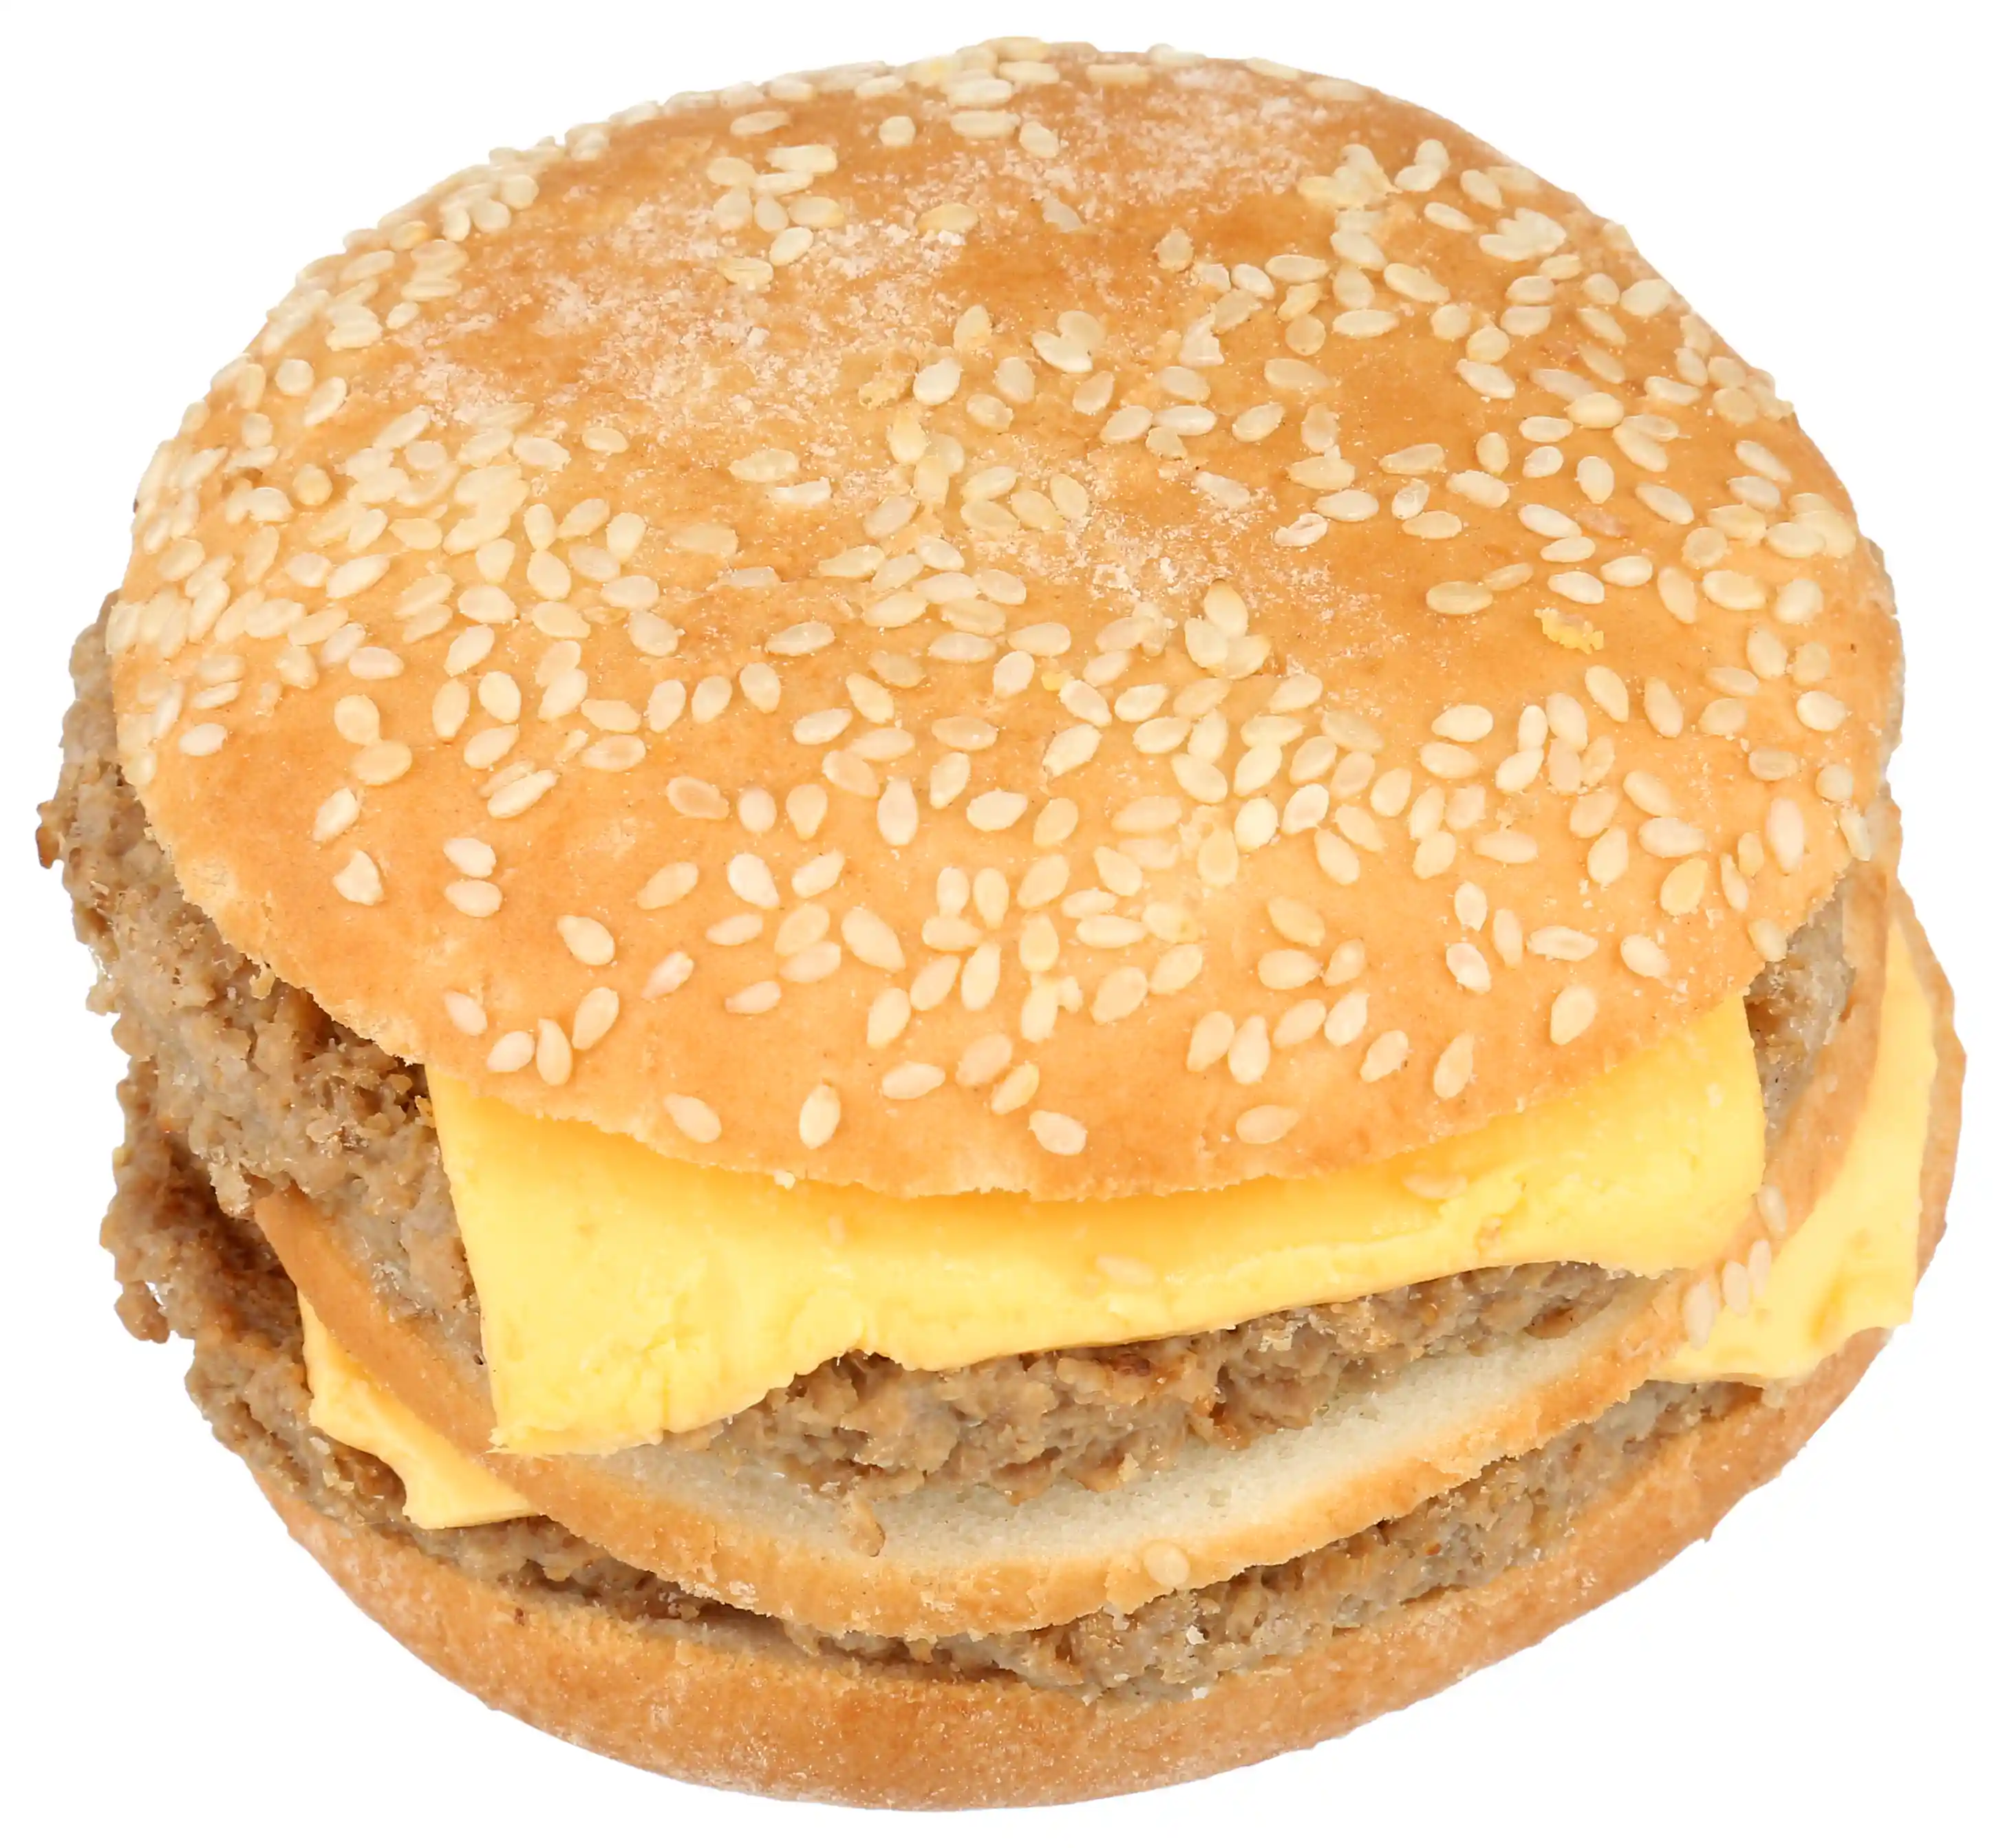 Fast Choice® Double Beef Stacker With Cheesehttps://images.salsify.com/image/upload/s--LogkYz2X--/q_25/f0rwdycdn072ihtcmouu.webp